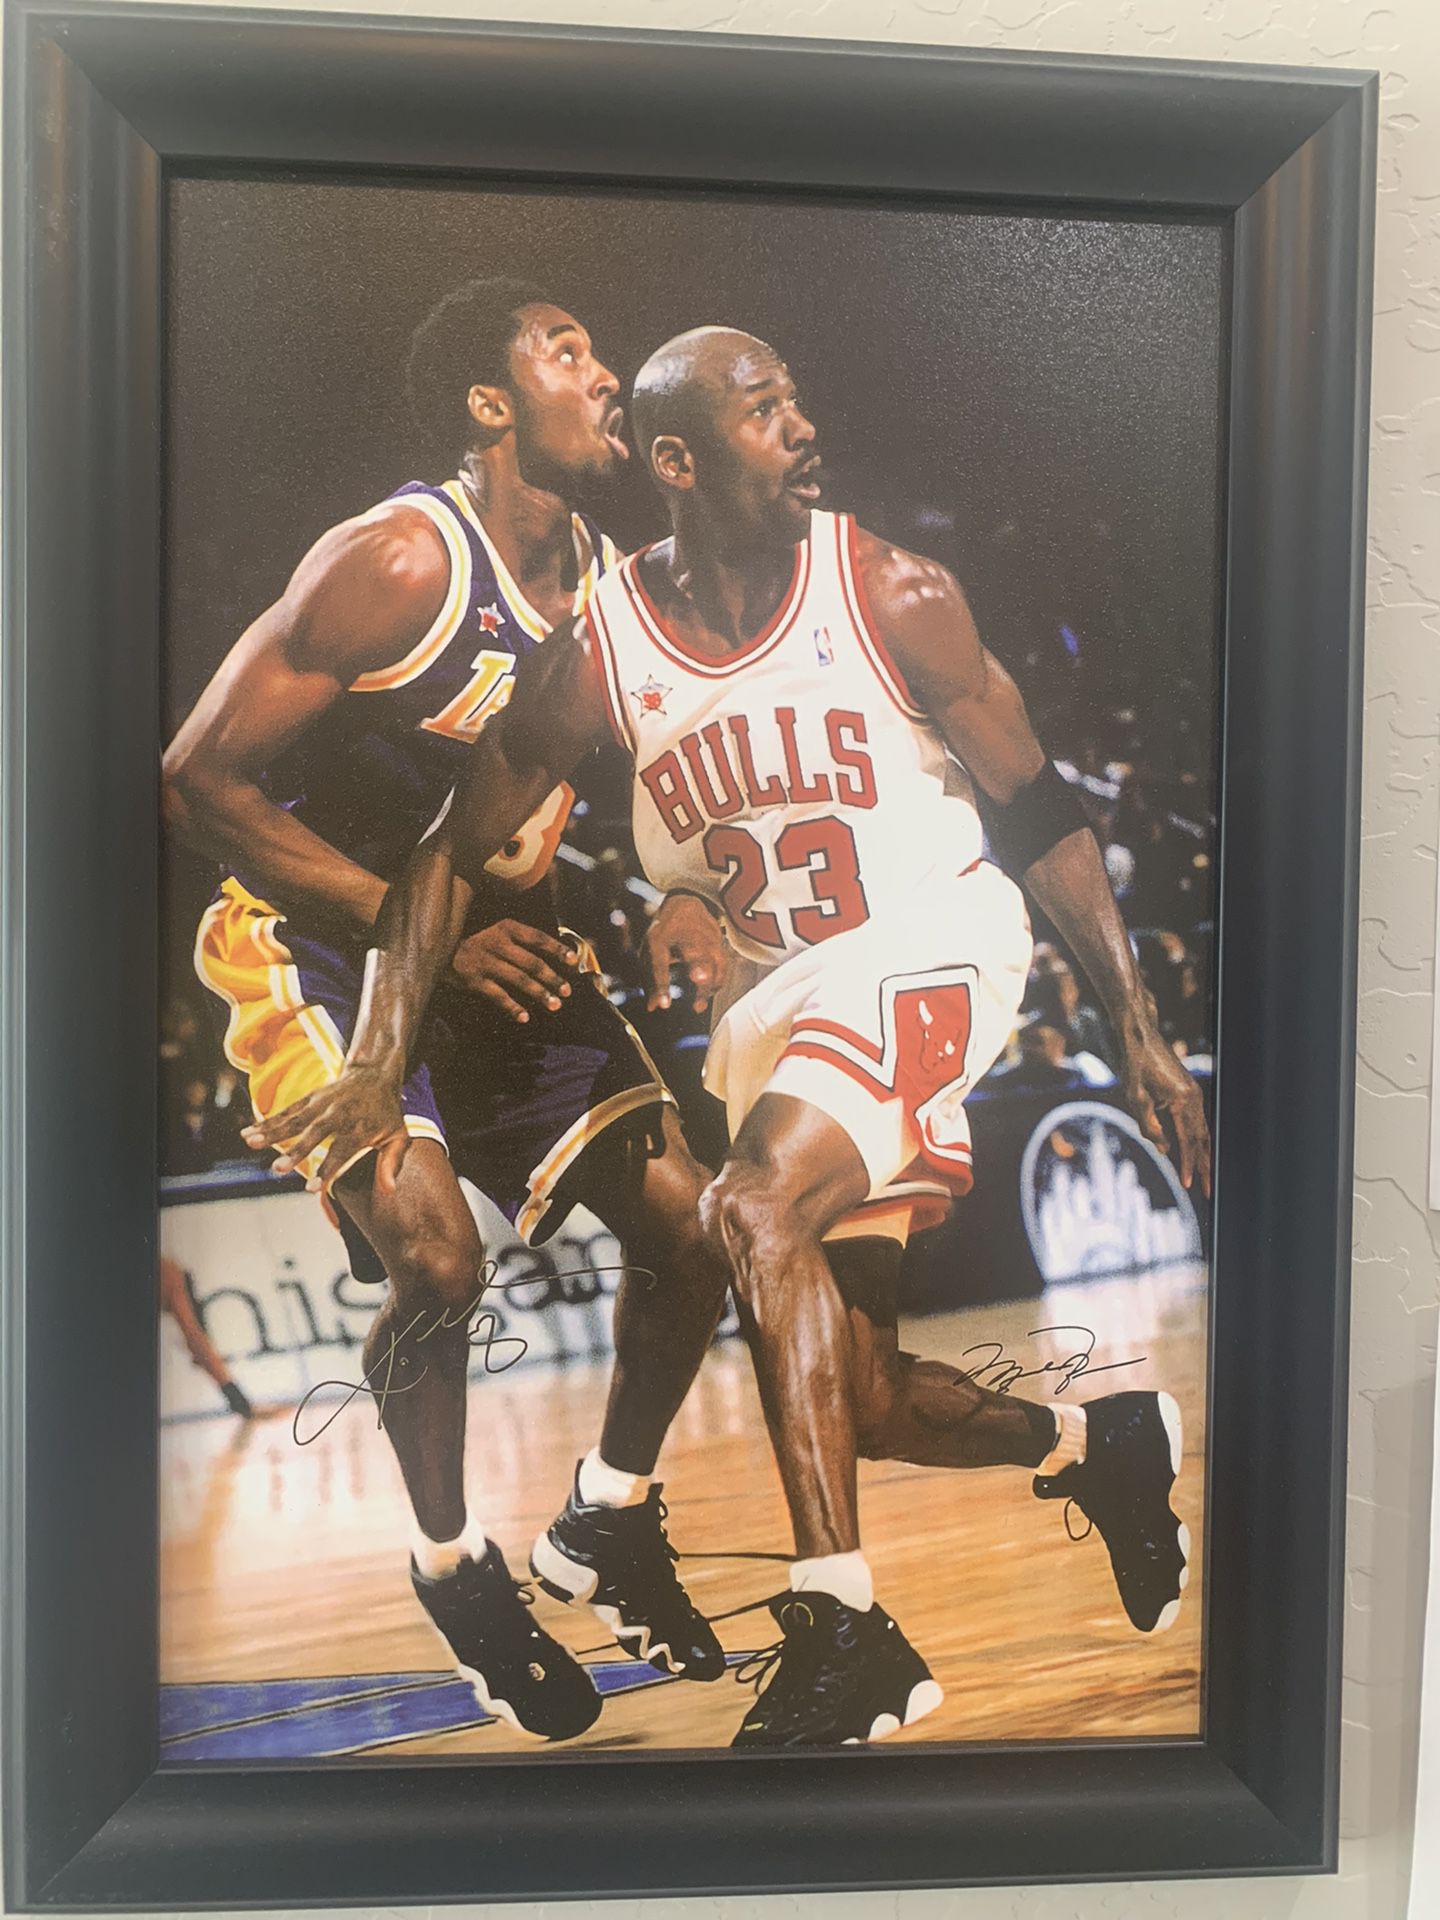 Autographed Poster Signed By Kobe Bryant And Michael Jordan